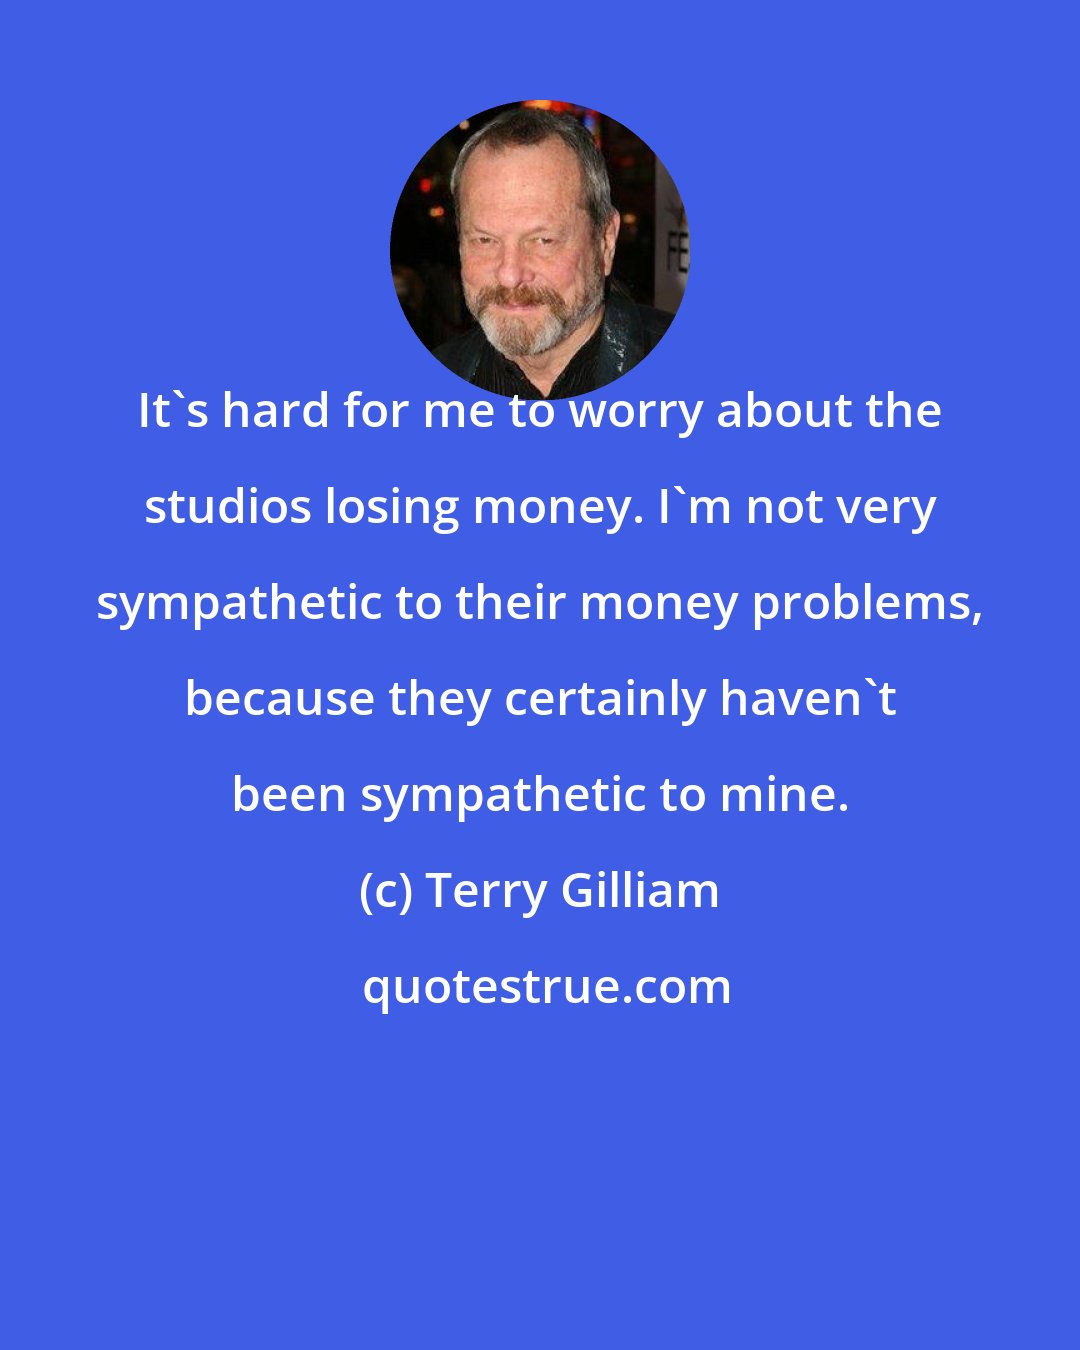 Terry Gilliam: It's hard for me to worry about the studios losing money. I'm not very sympathetic to their money problems, because they certainly haven't been sympathetic to mine.